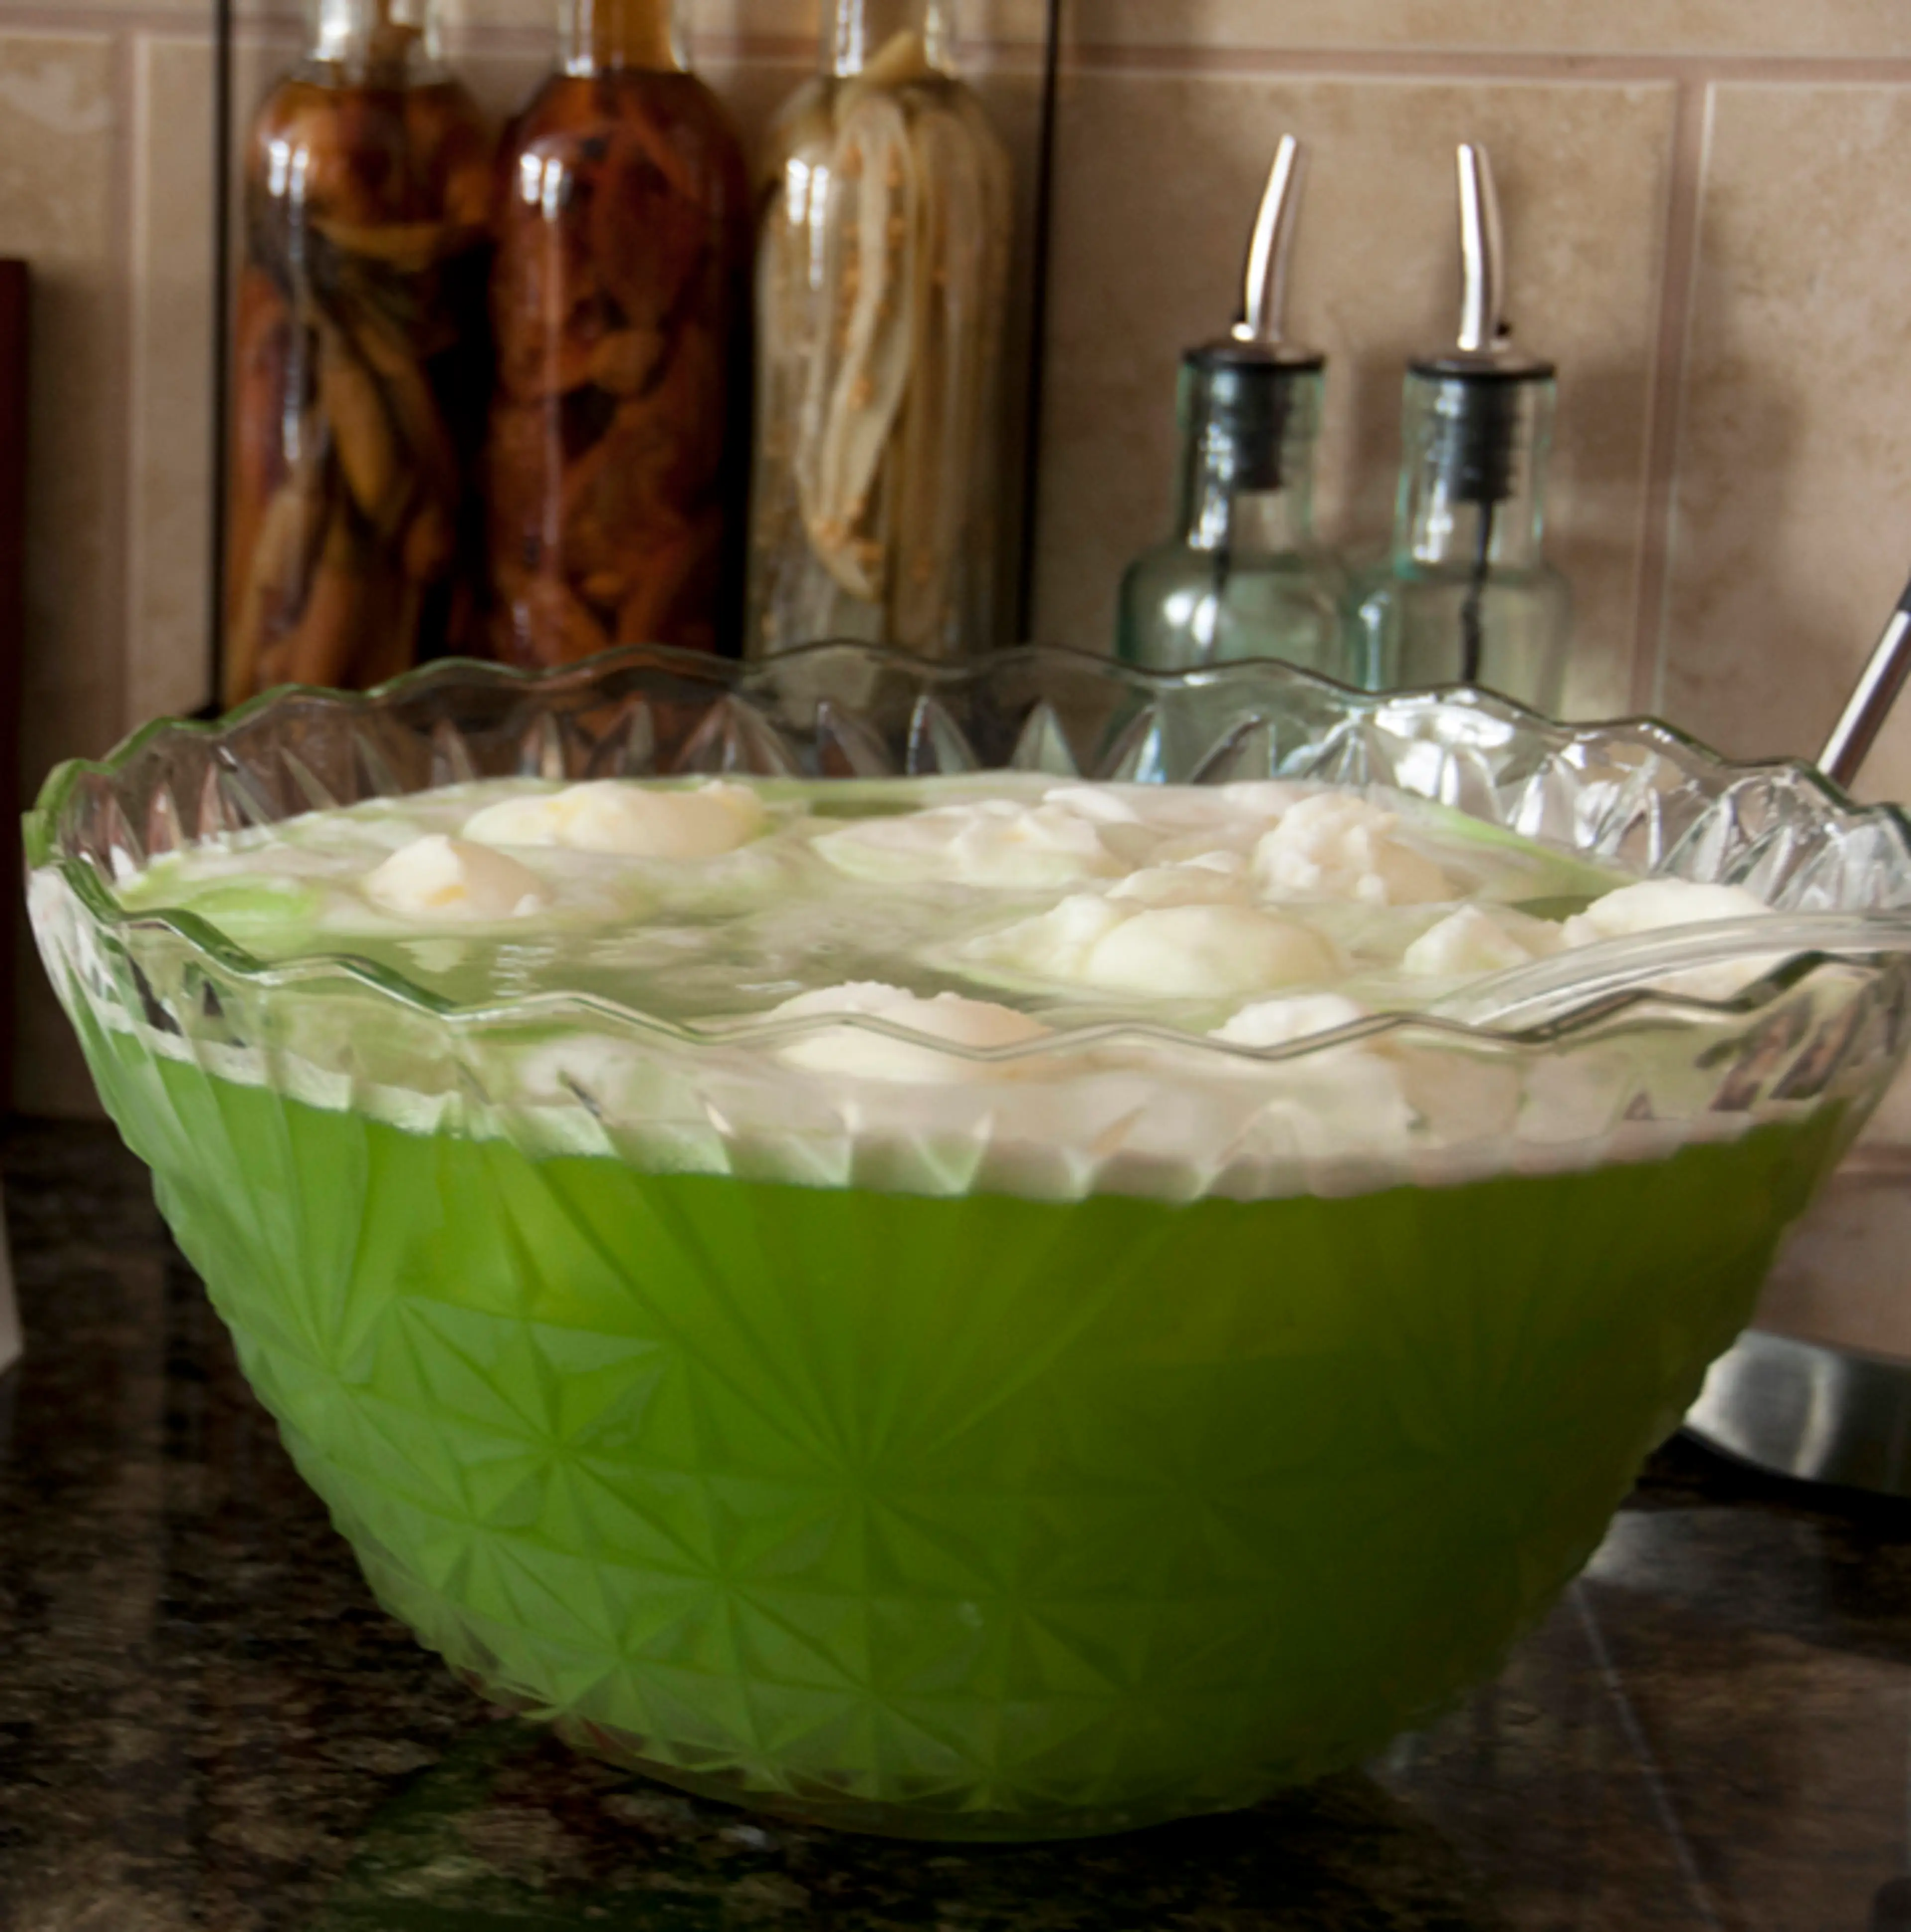 Christmas “Grinch” Lime Sherbet Punch